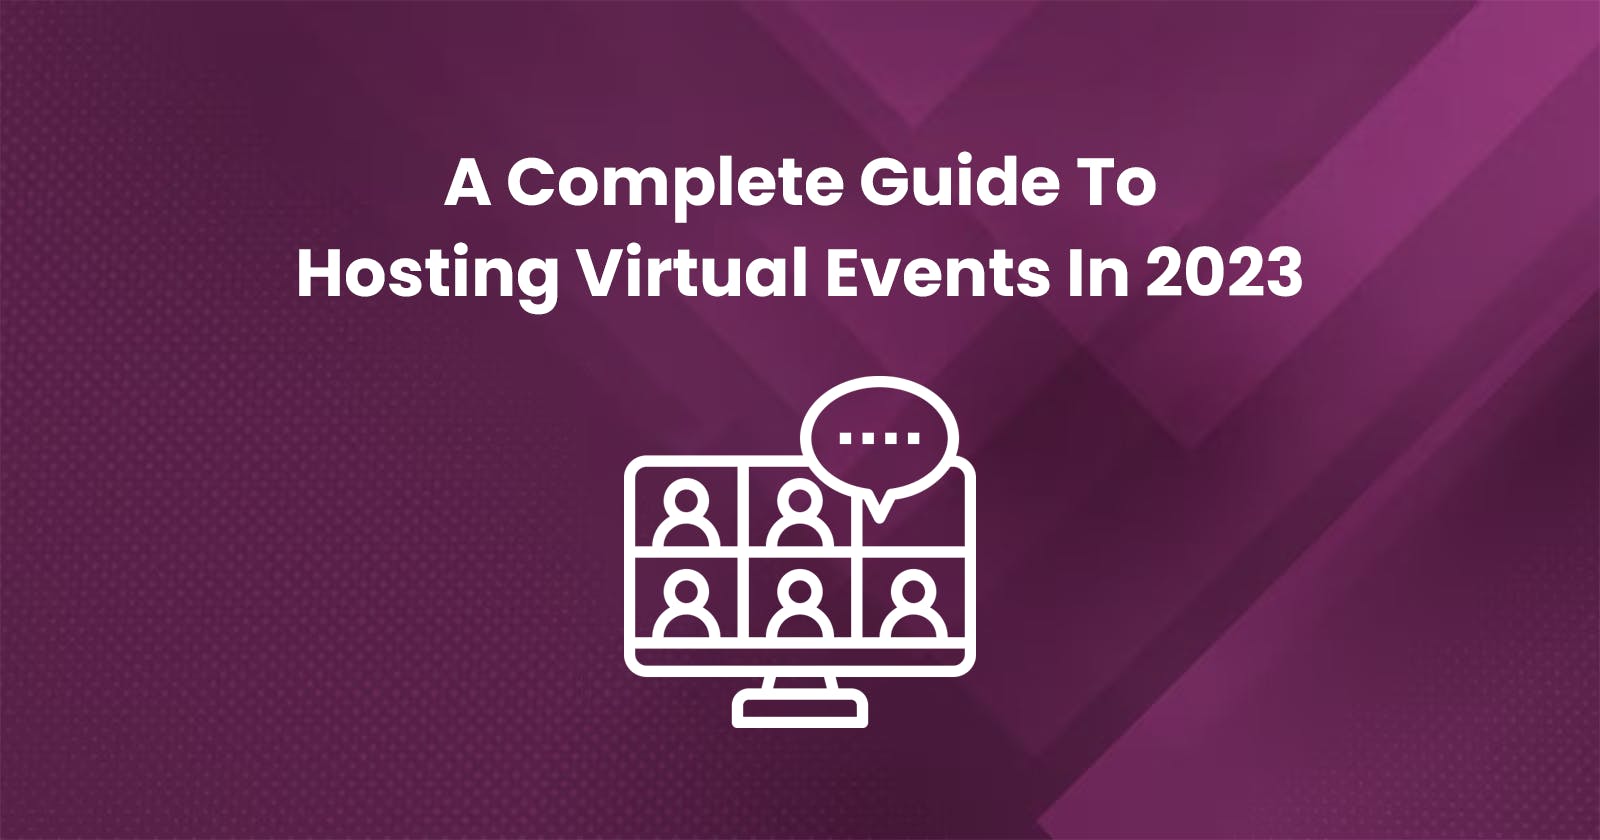 A Complete Guide To Hosting Virtual Events In 2023